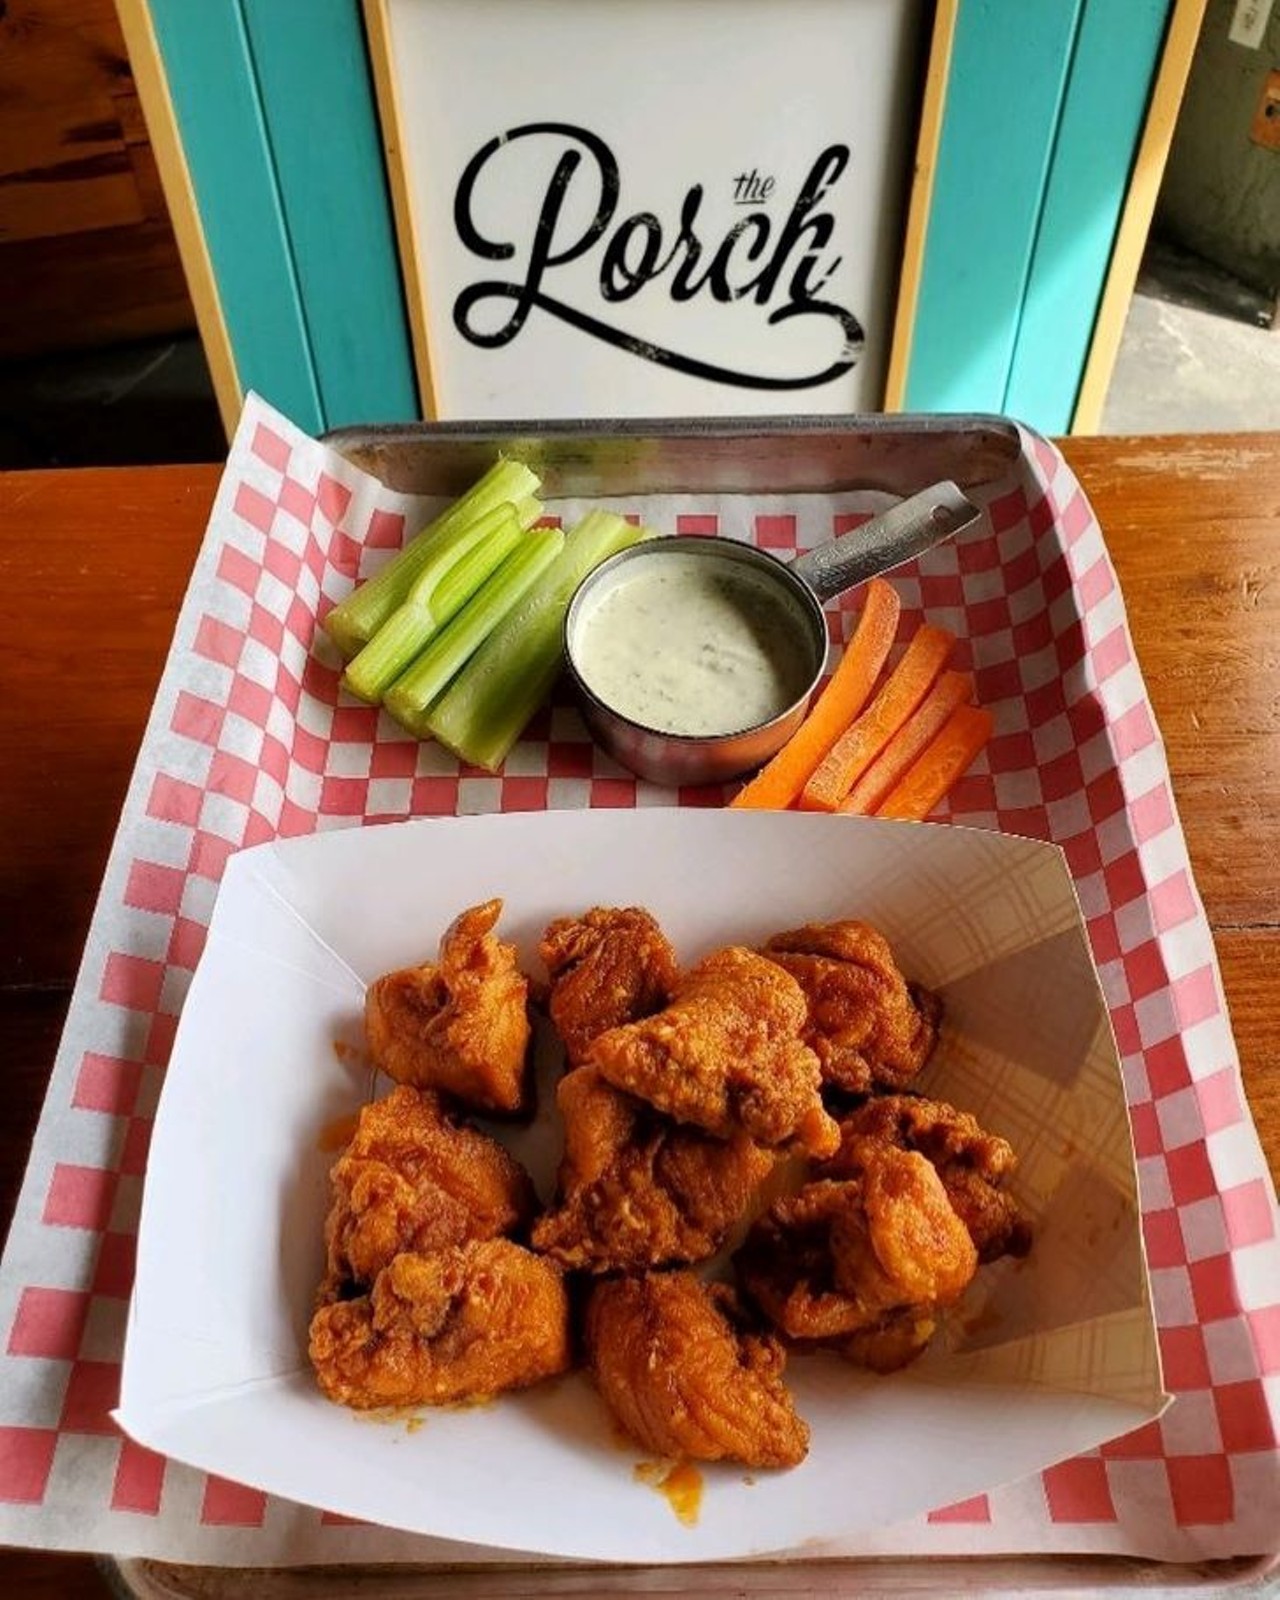 The Porch 
643 N. Orange Ave., Winter Park, 407-571-9101
You cannot go wrong with the Porch&#146;s twice cooked and brined crispy wings. Choose your own flavor of heartburn with 15 sauce options. 
Photo via The Porch on Facebook